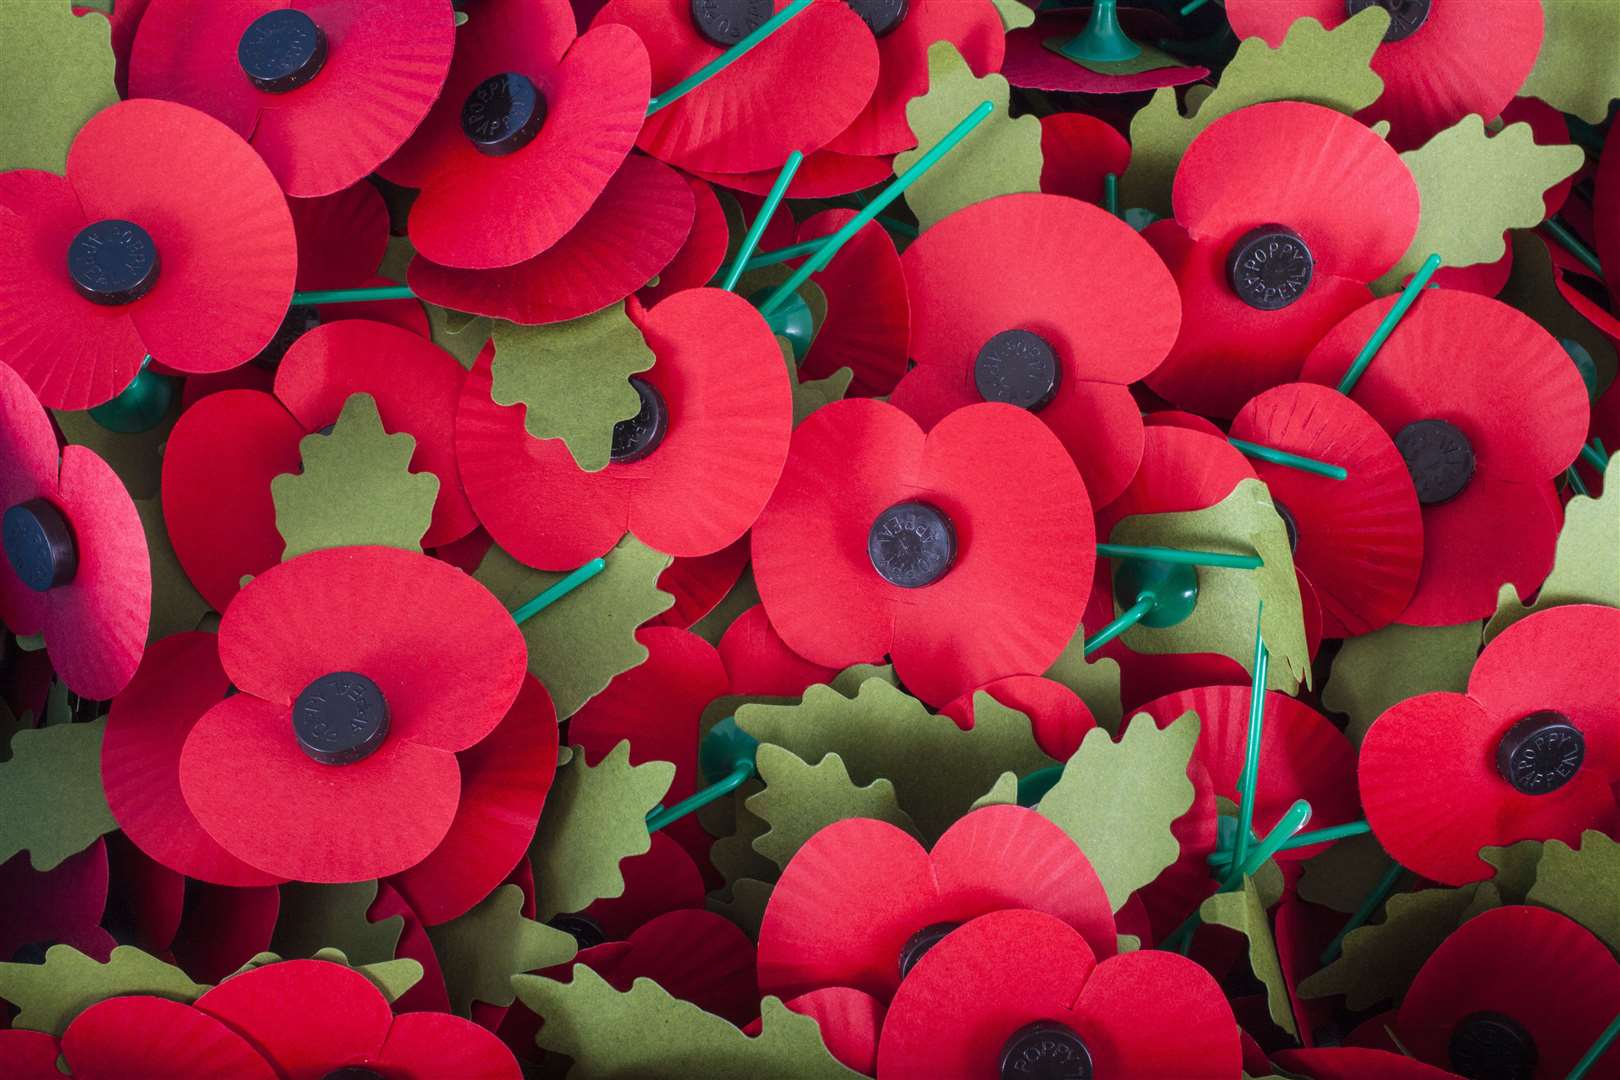 Artificial Poppies used to commemorate Remembrance Day.